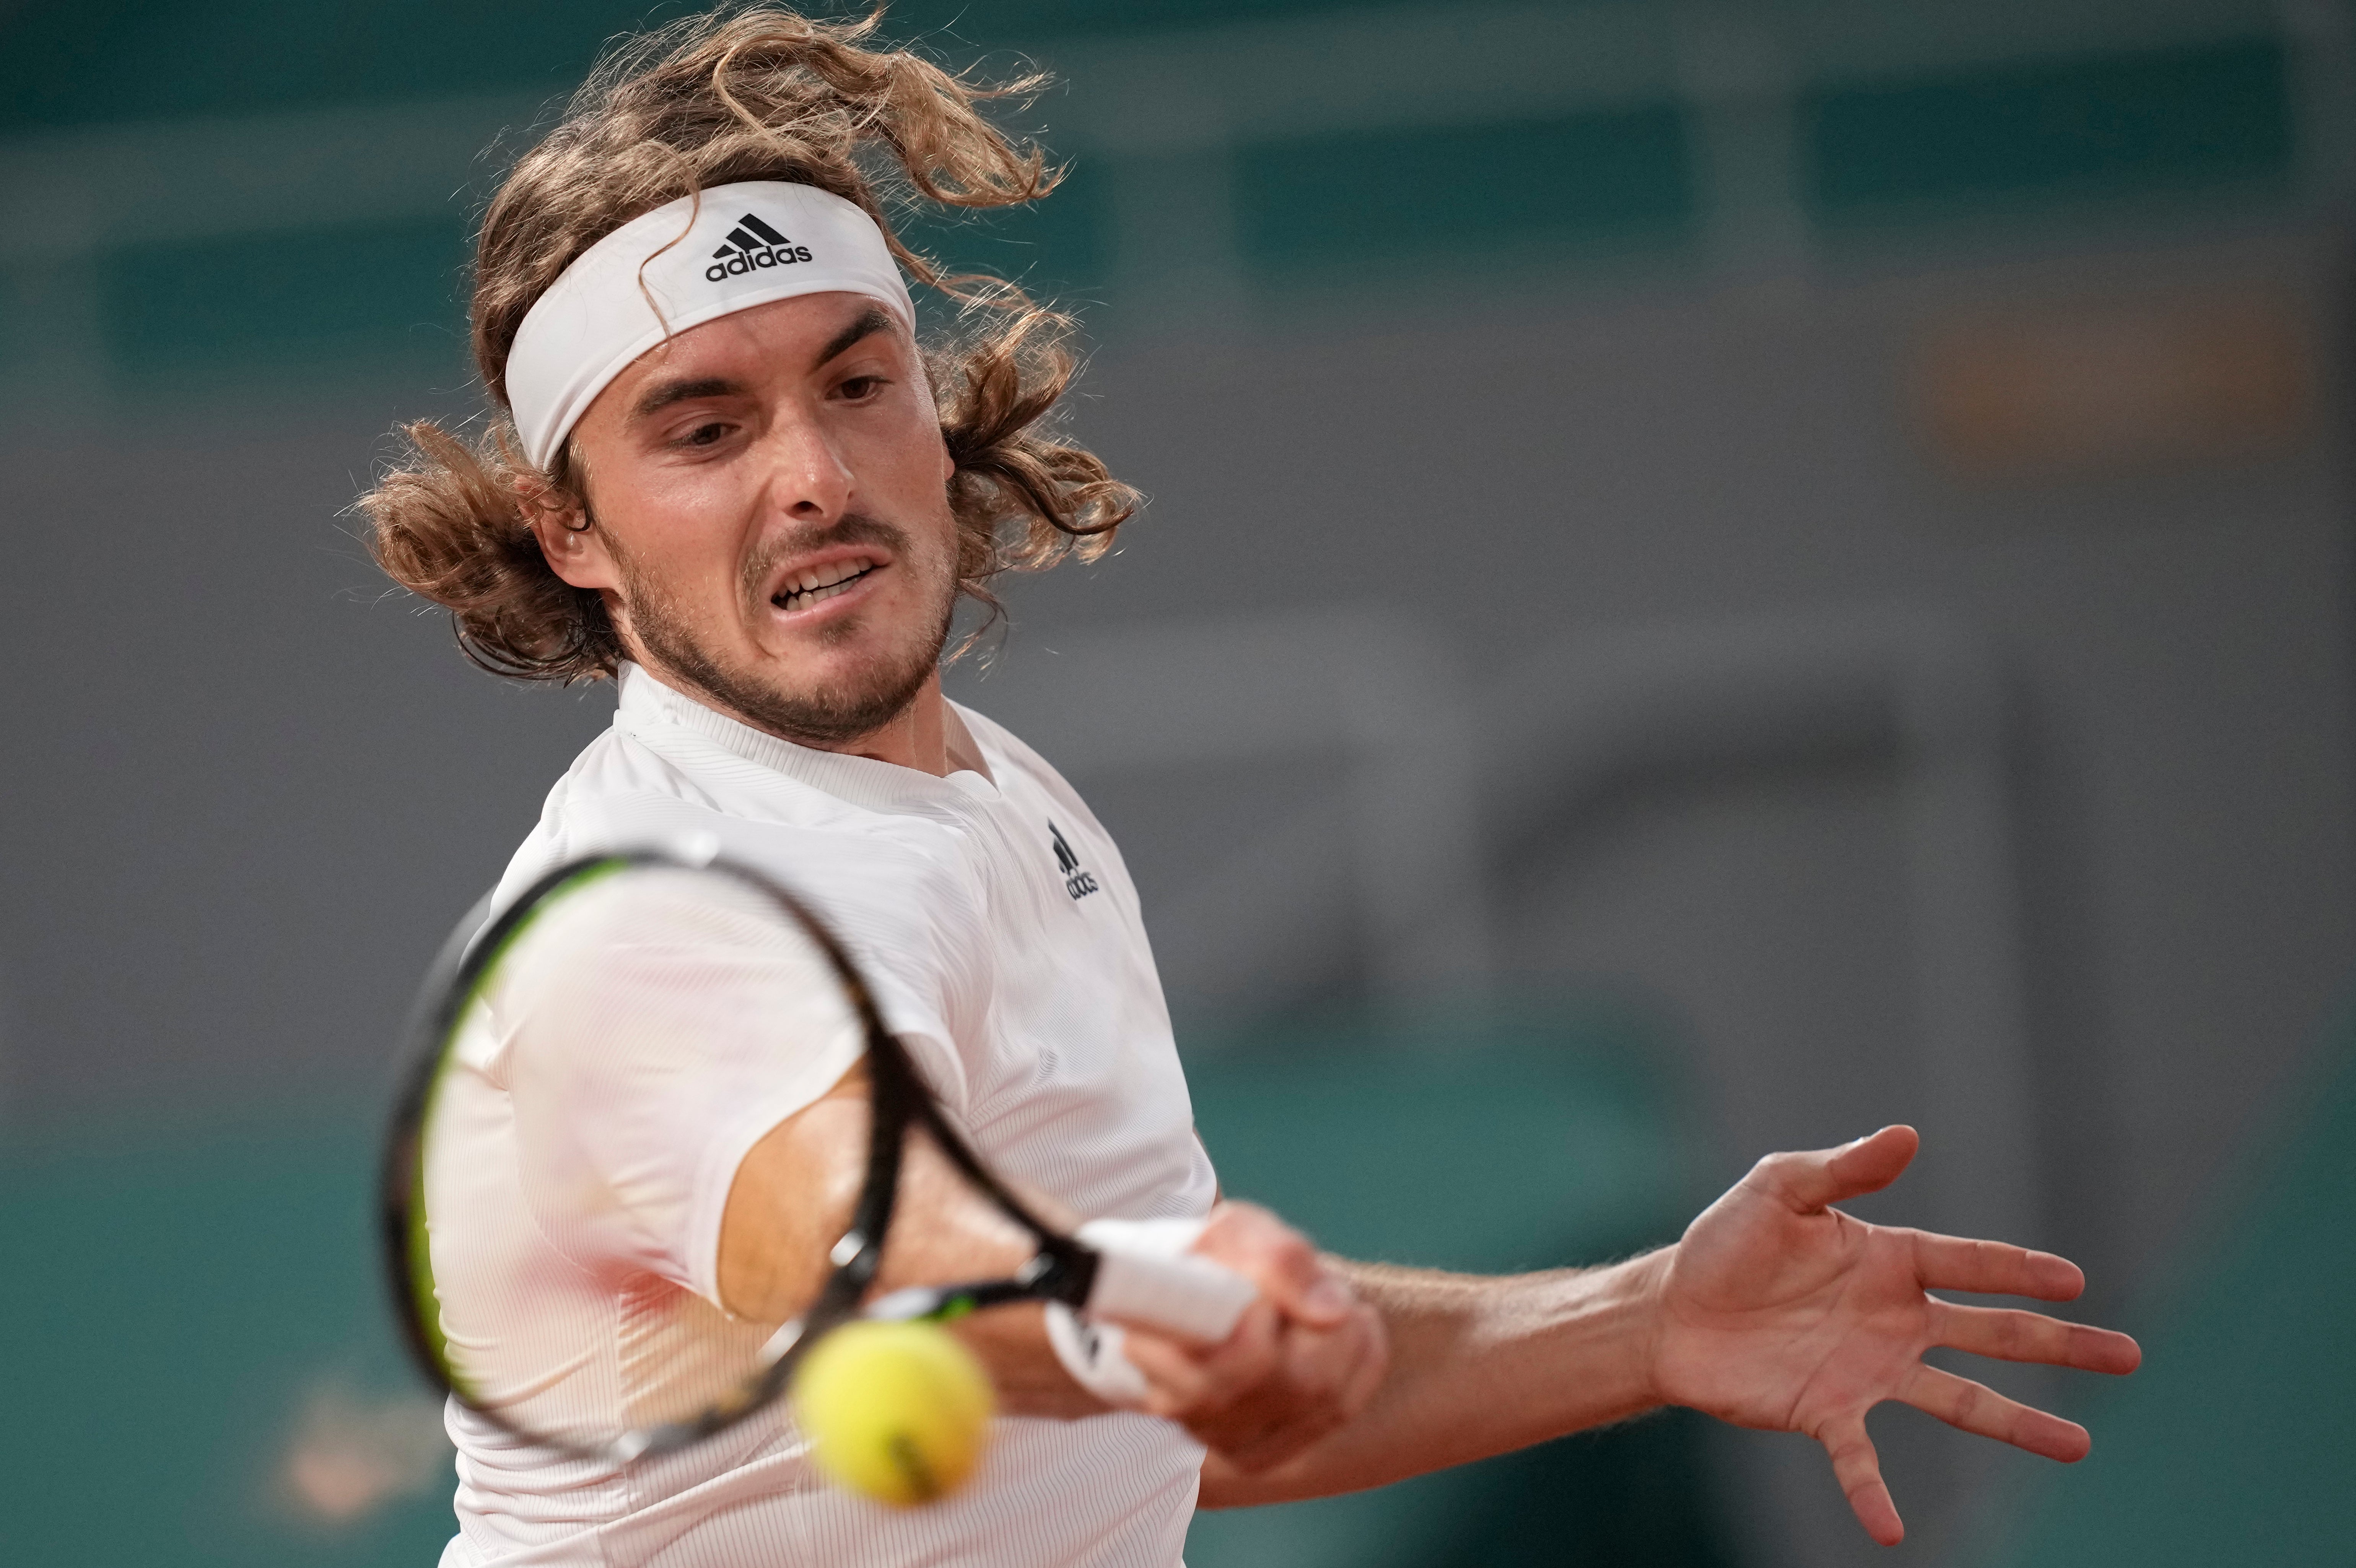 Stefanos Tsitsipas hits a forehand during his victory over John Isner